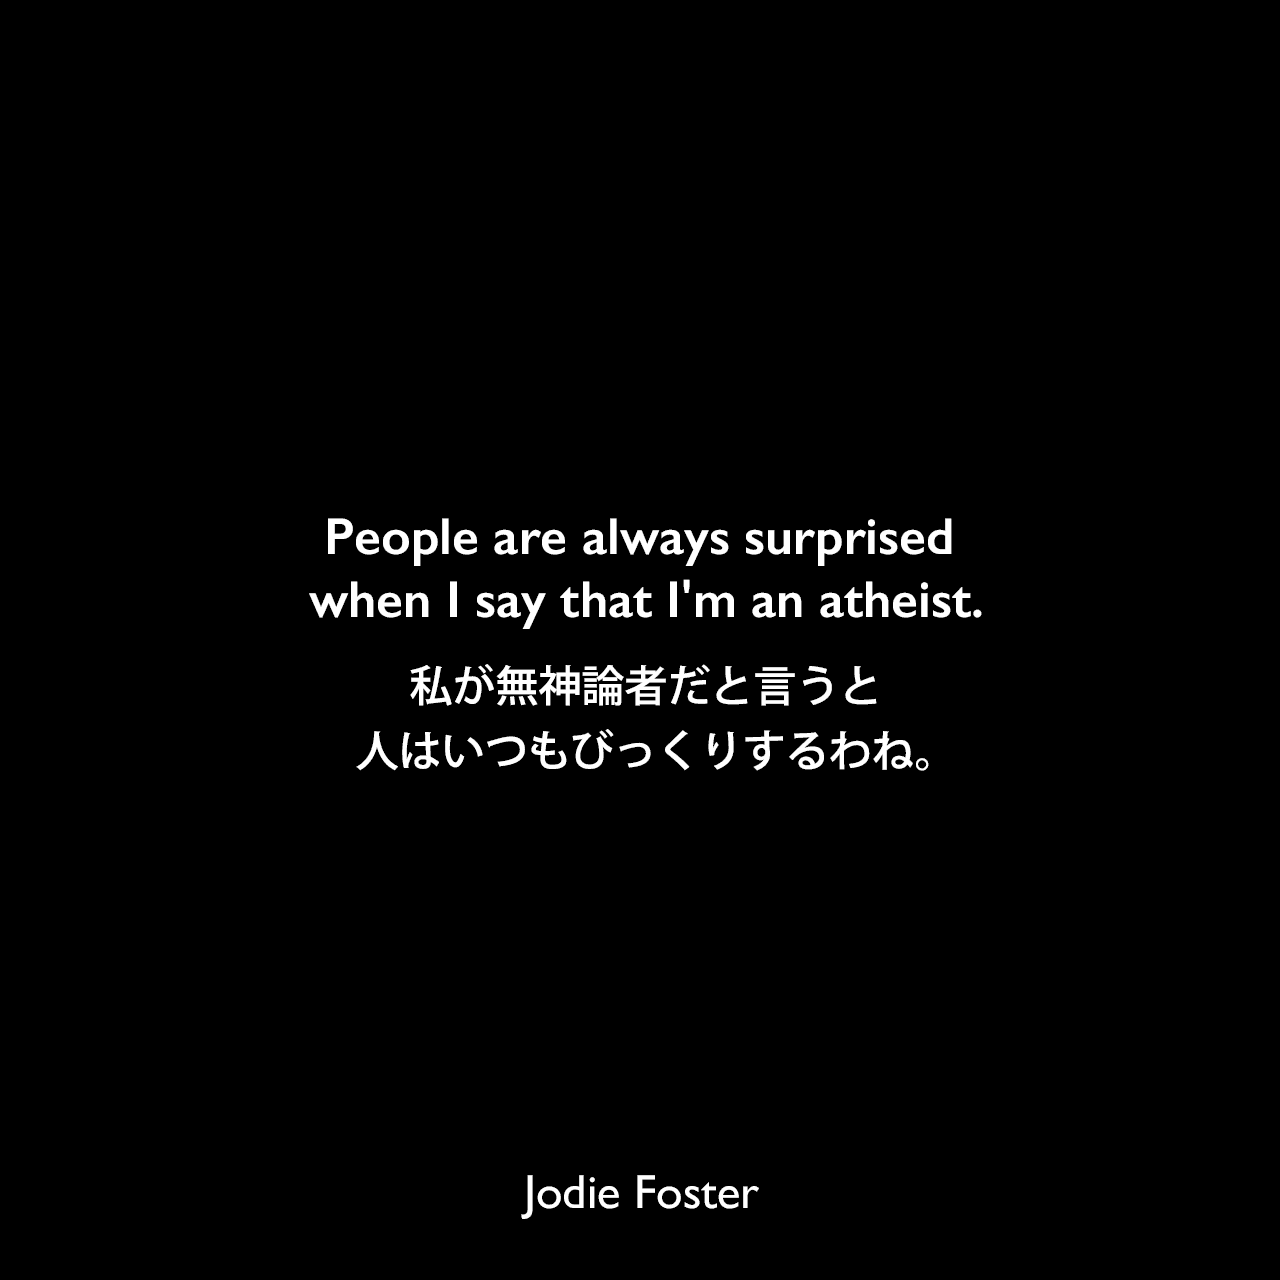 People are always surprised when I say that I'm an atheist.私が無神論者だと言うと、人はいつもびっくりするわね。Jodie Foster